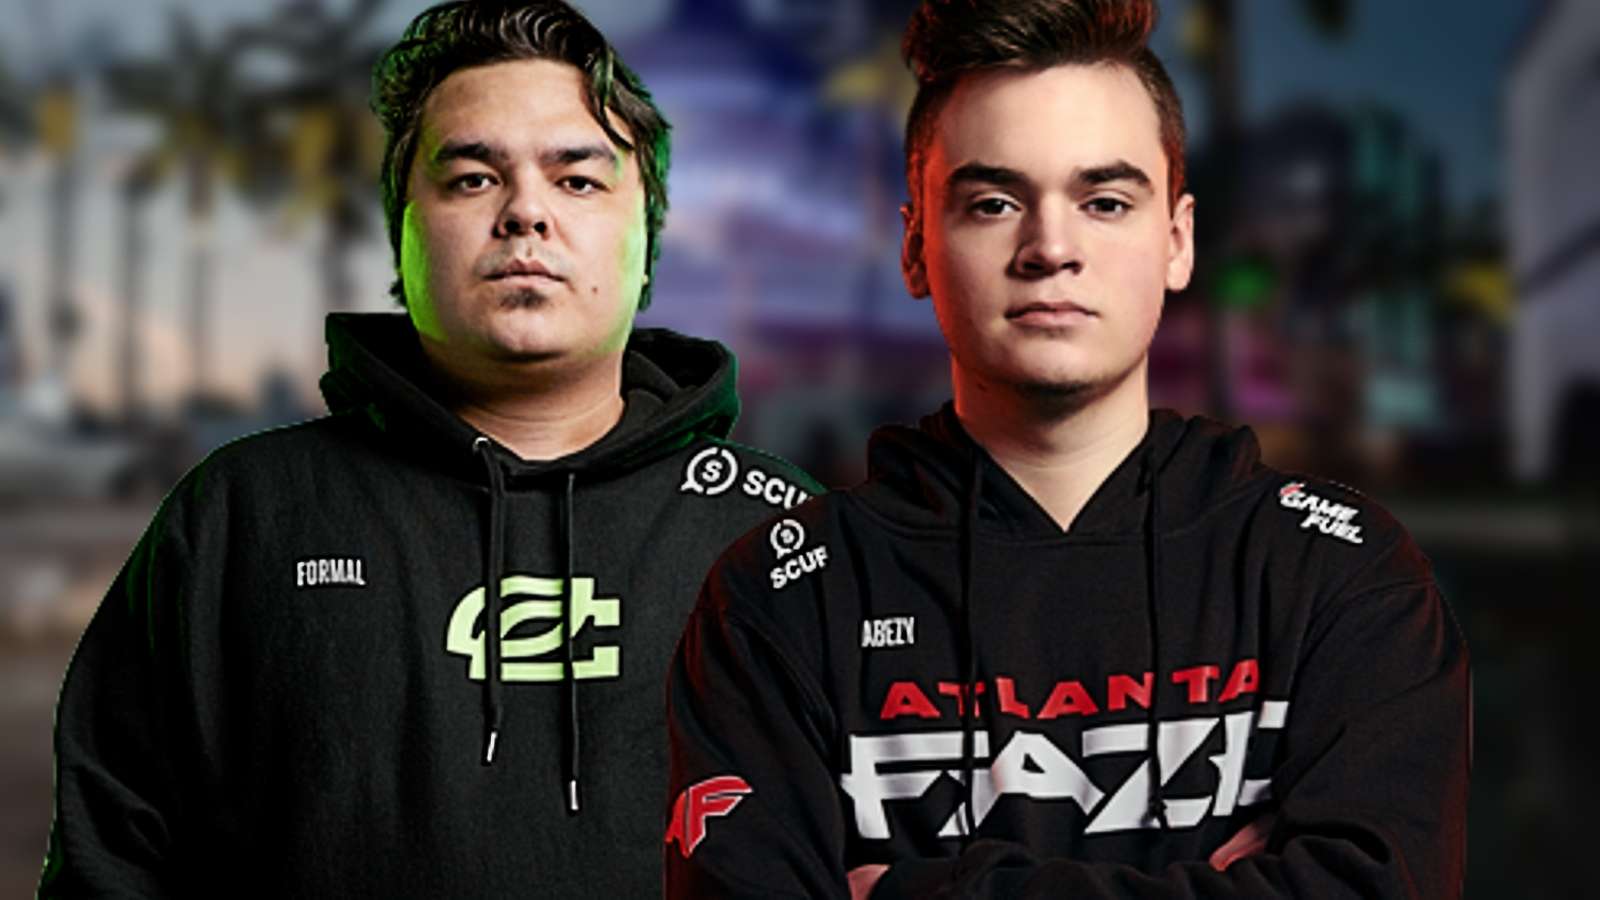 OpTic Chicago's Formal and Atlanta FaZe's Abezy after CDL Opening Weekend